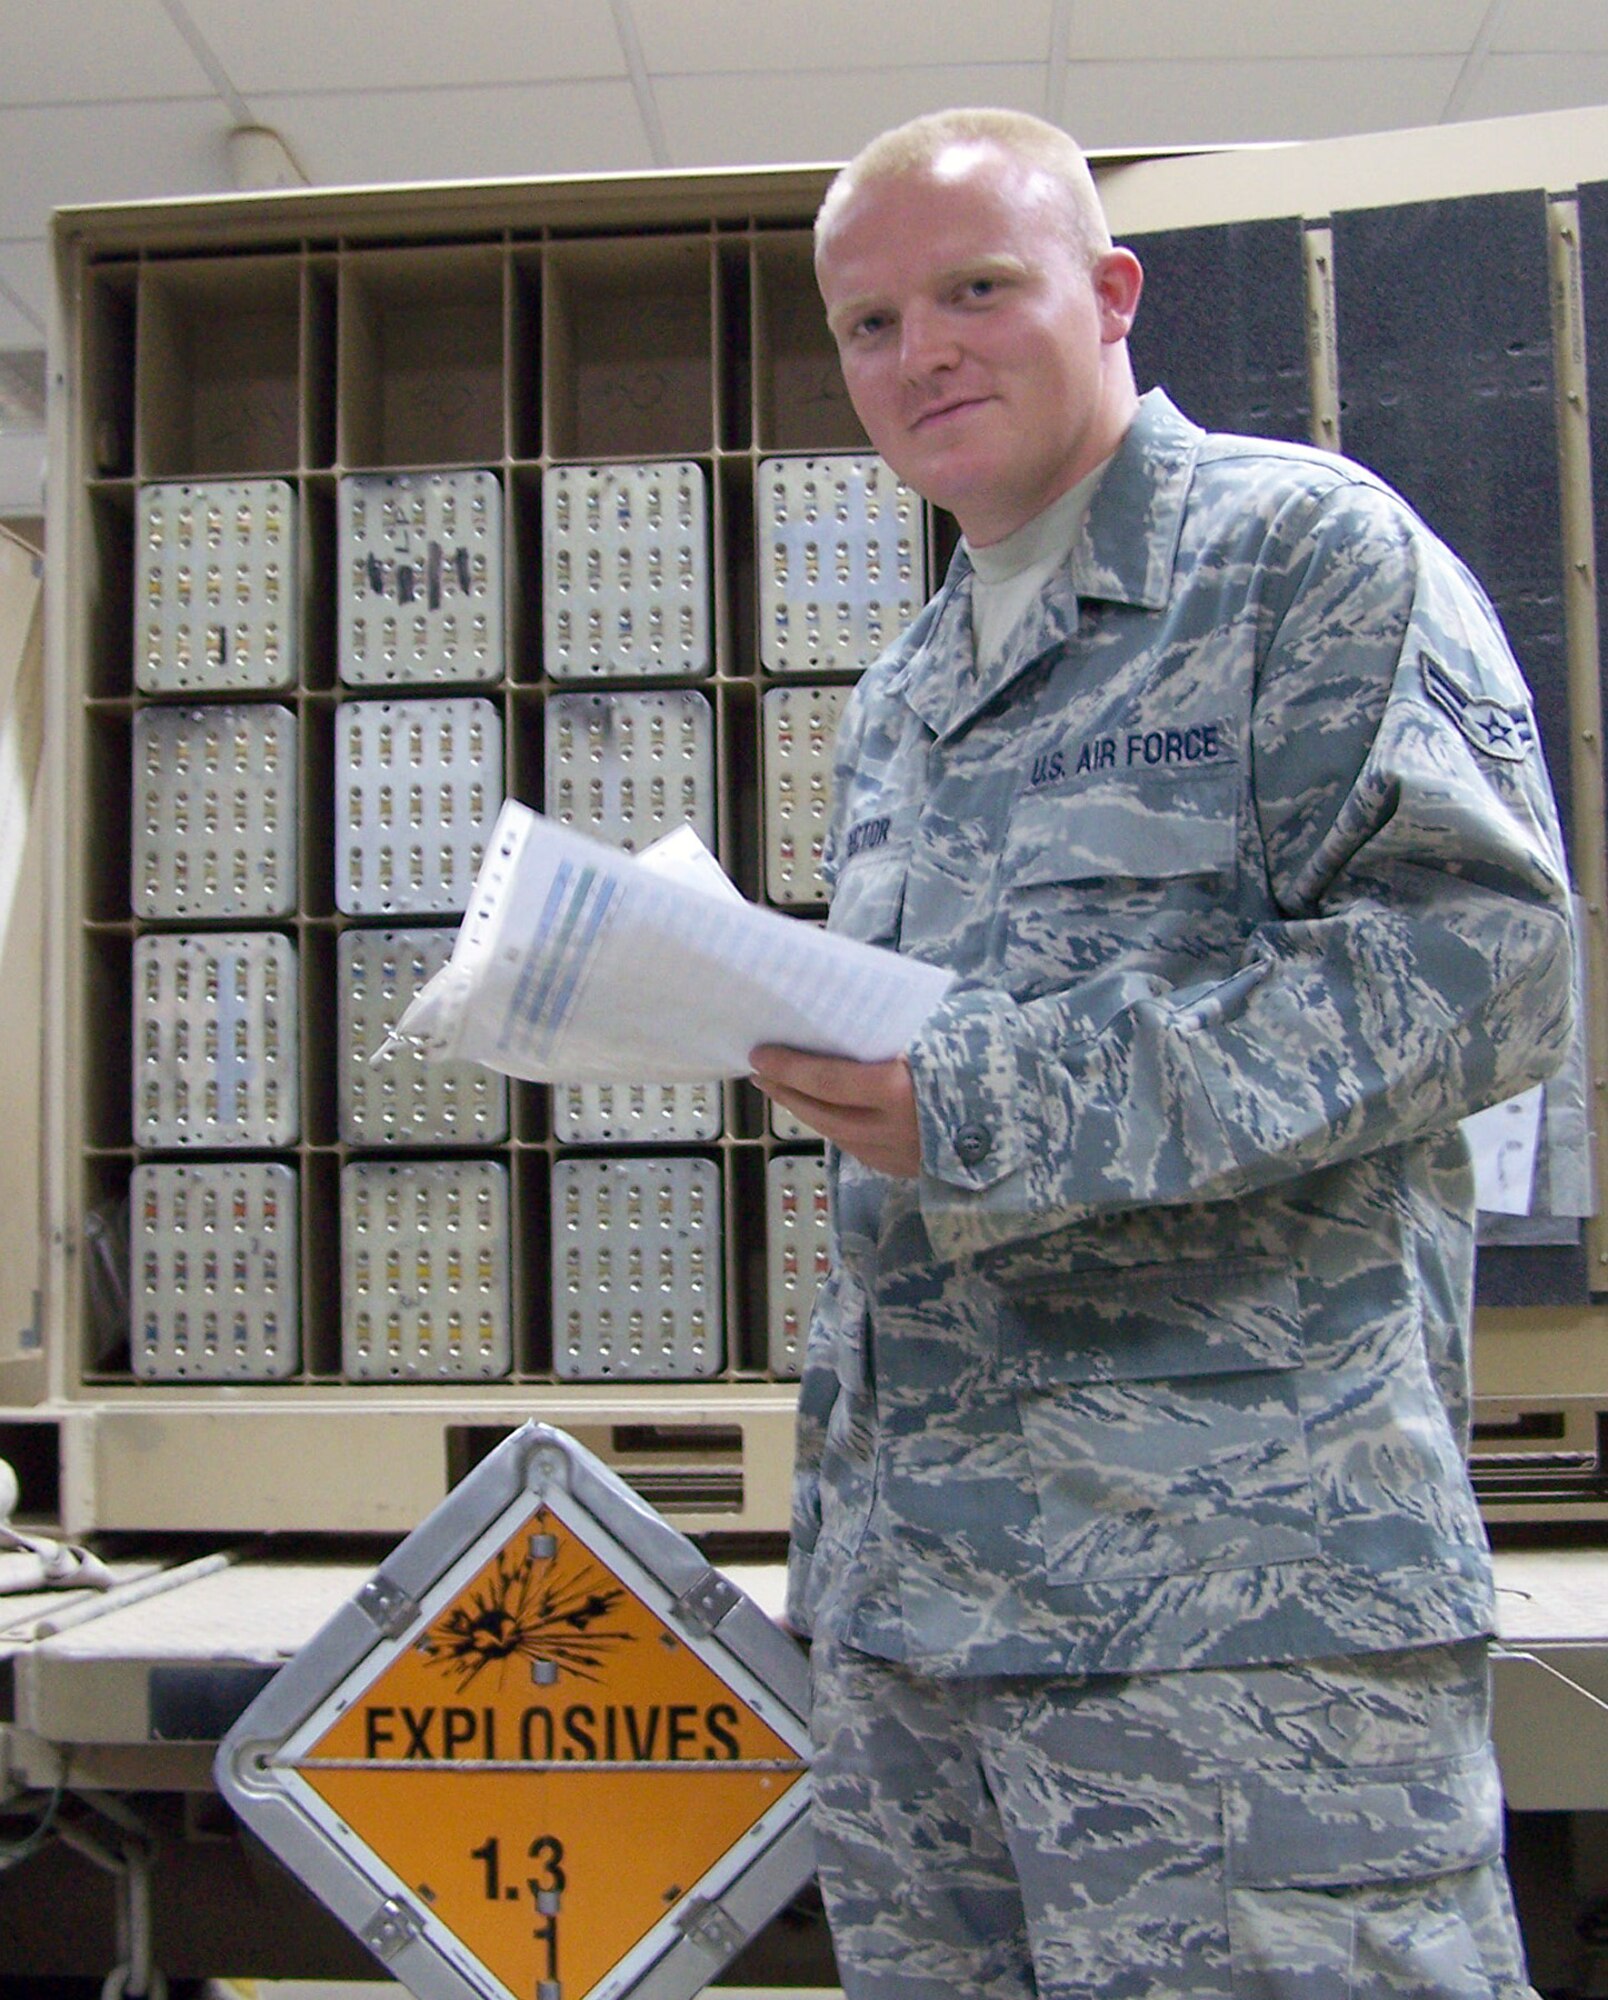 SOUTHWEST ASIA -- Airman 1st Class Jason Rector, 386th Expeditionary Maintenance Squadron munitions systems journeyman, is deployed from the 92nd Maintenance Squadron at Fairchild Air Force Base, Wash. (U.S. Air Force courtesy photo)